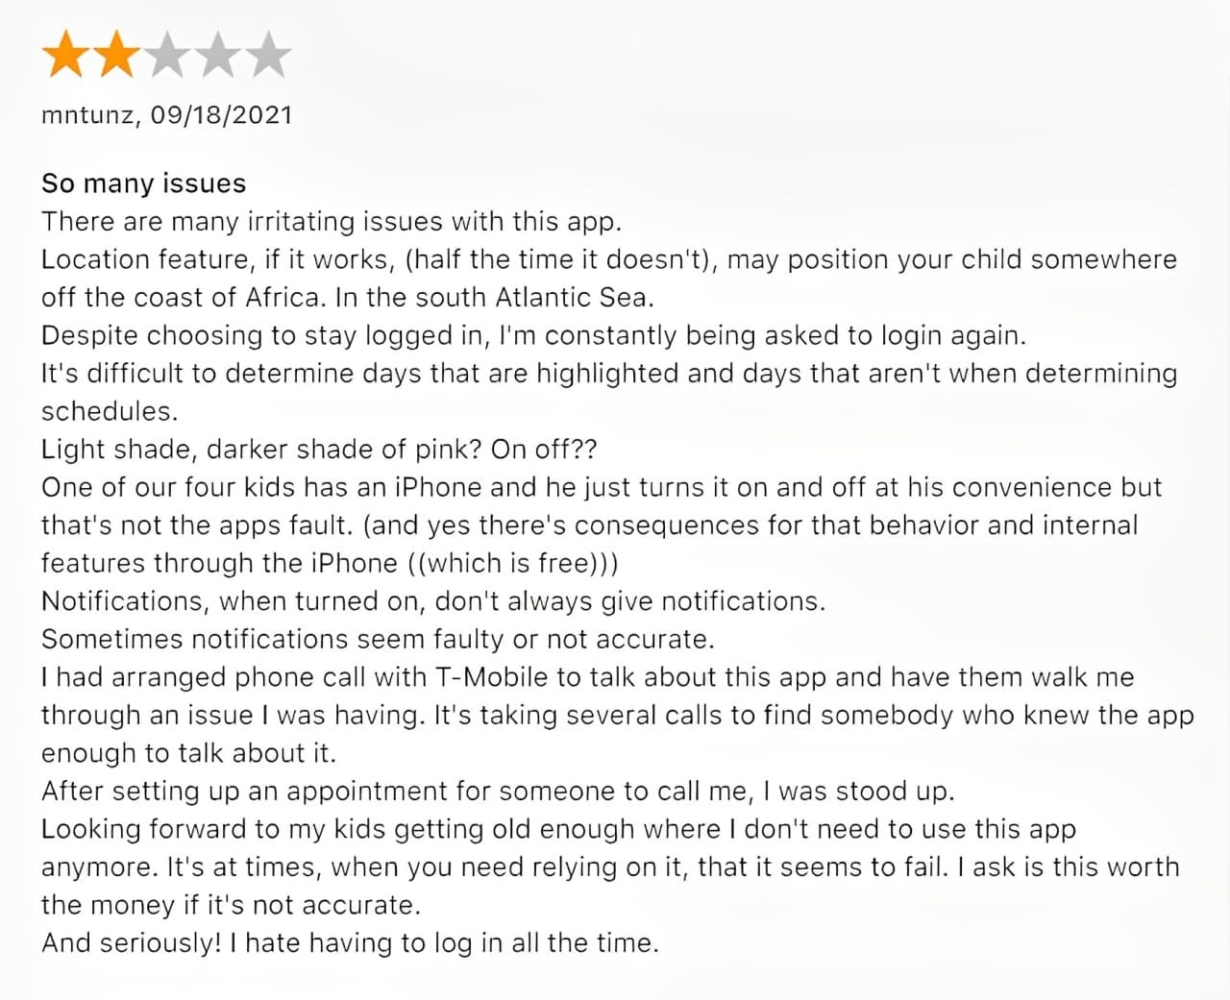 An image of a negative user review of T-Mobile parental controls